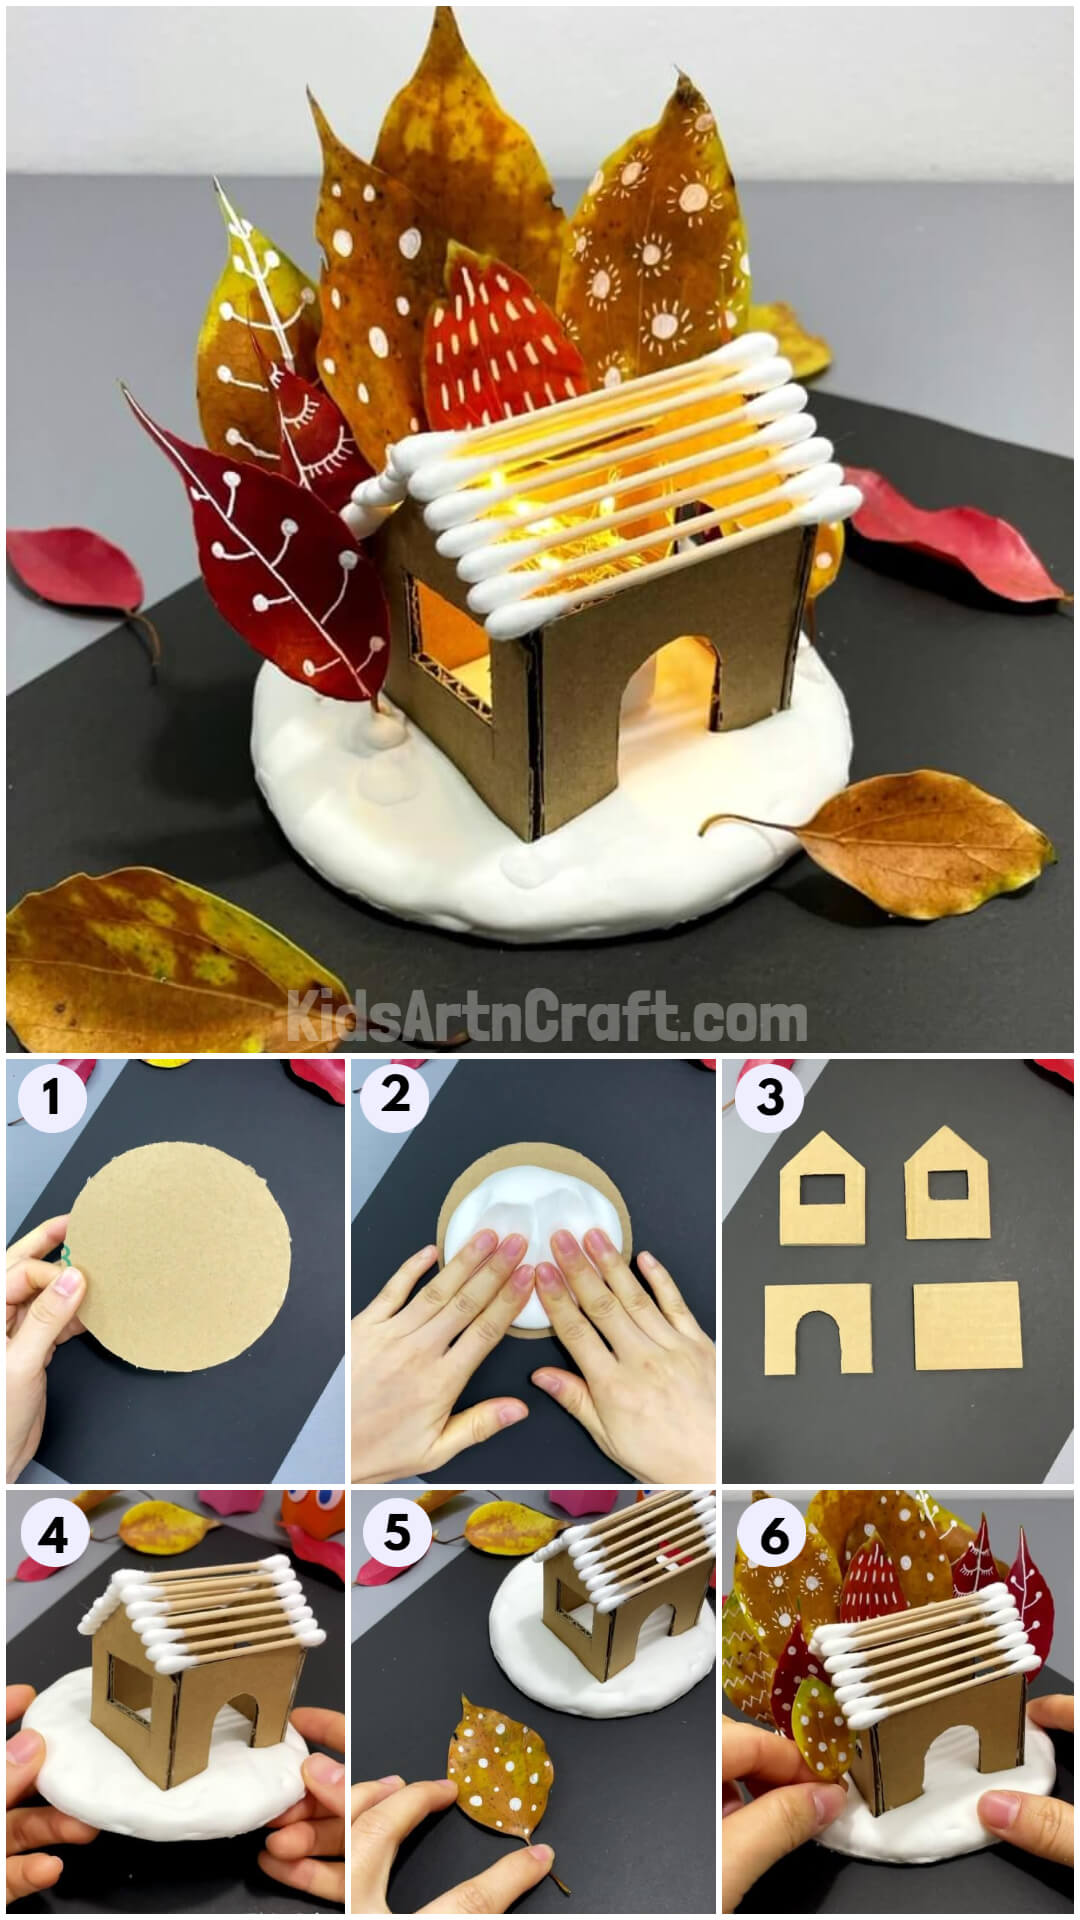 Beautiful House Craft Tutorial With Cardboard And Cotton Swab